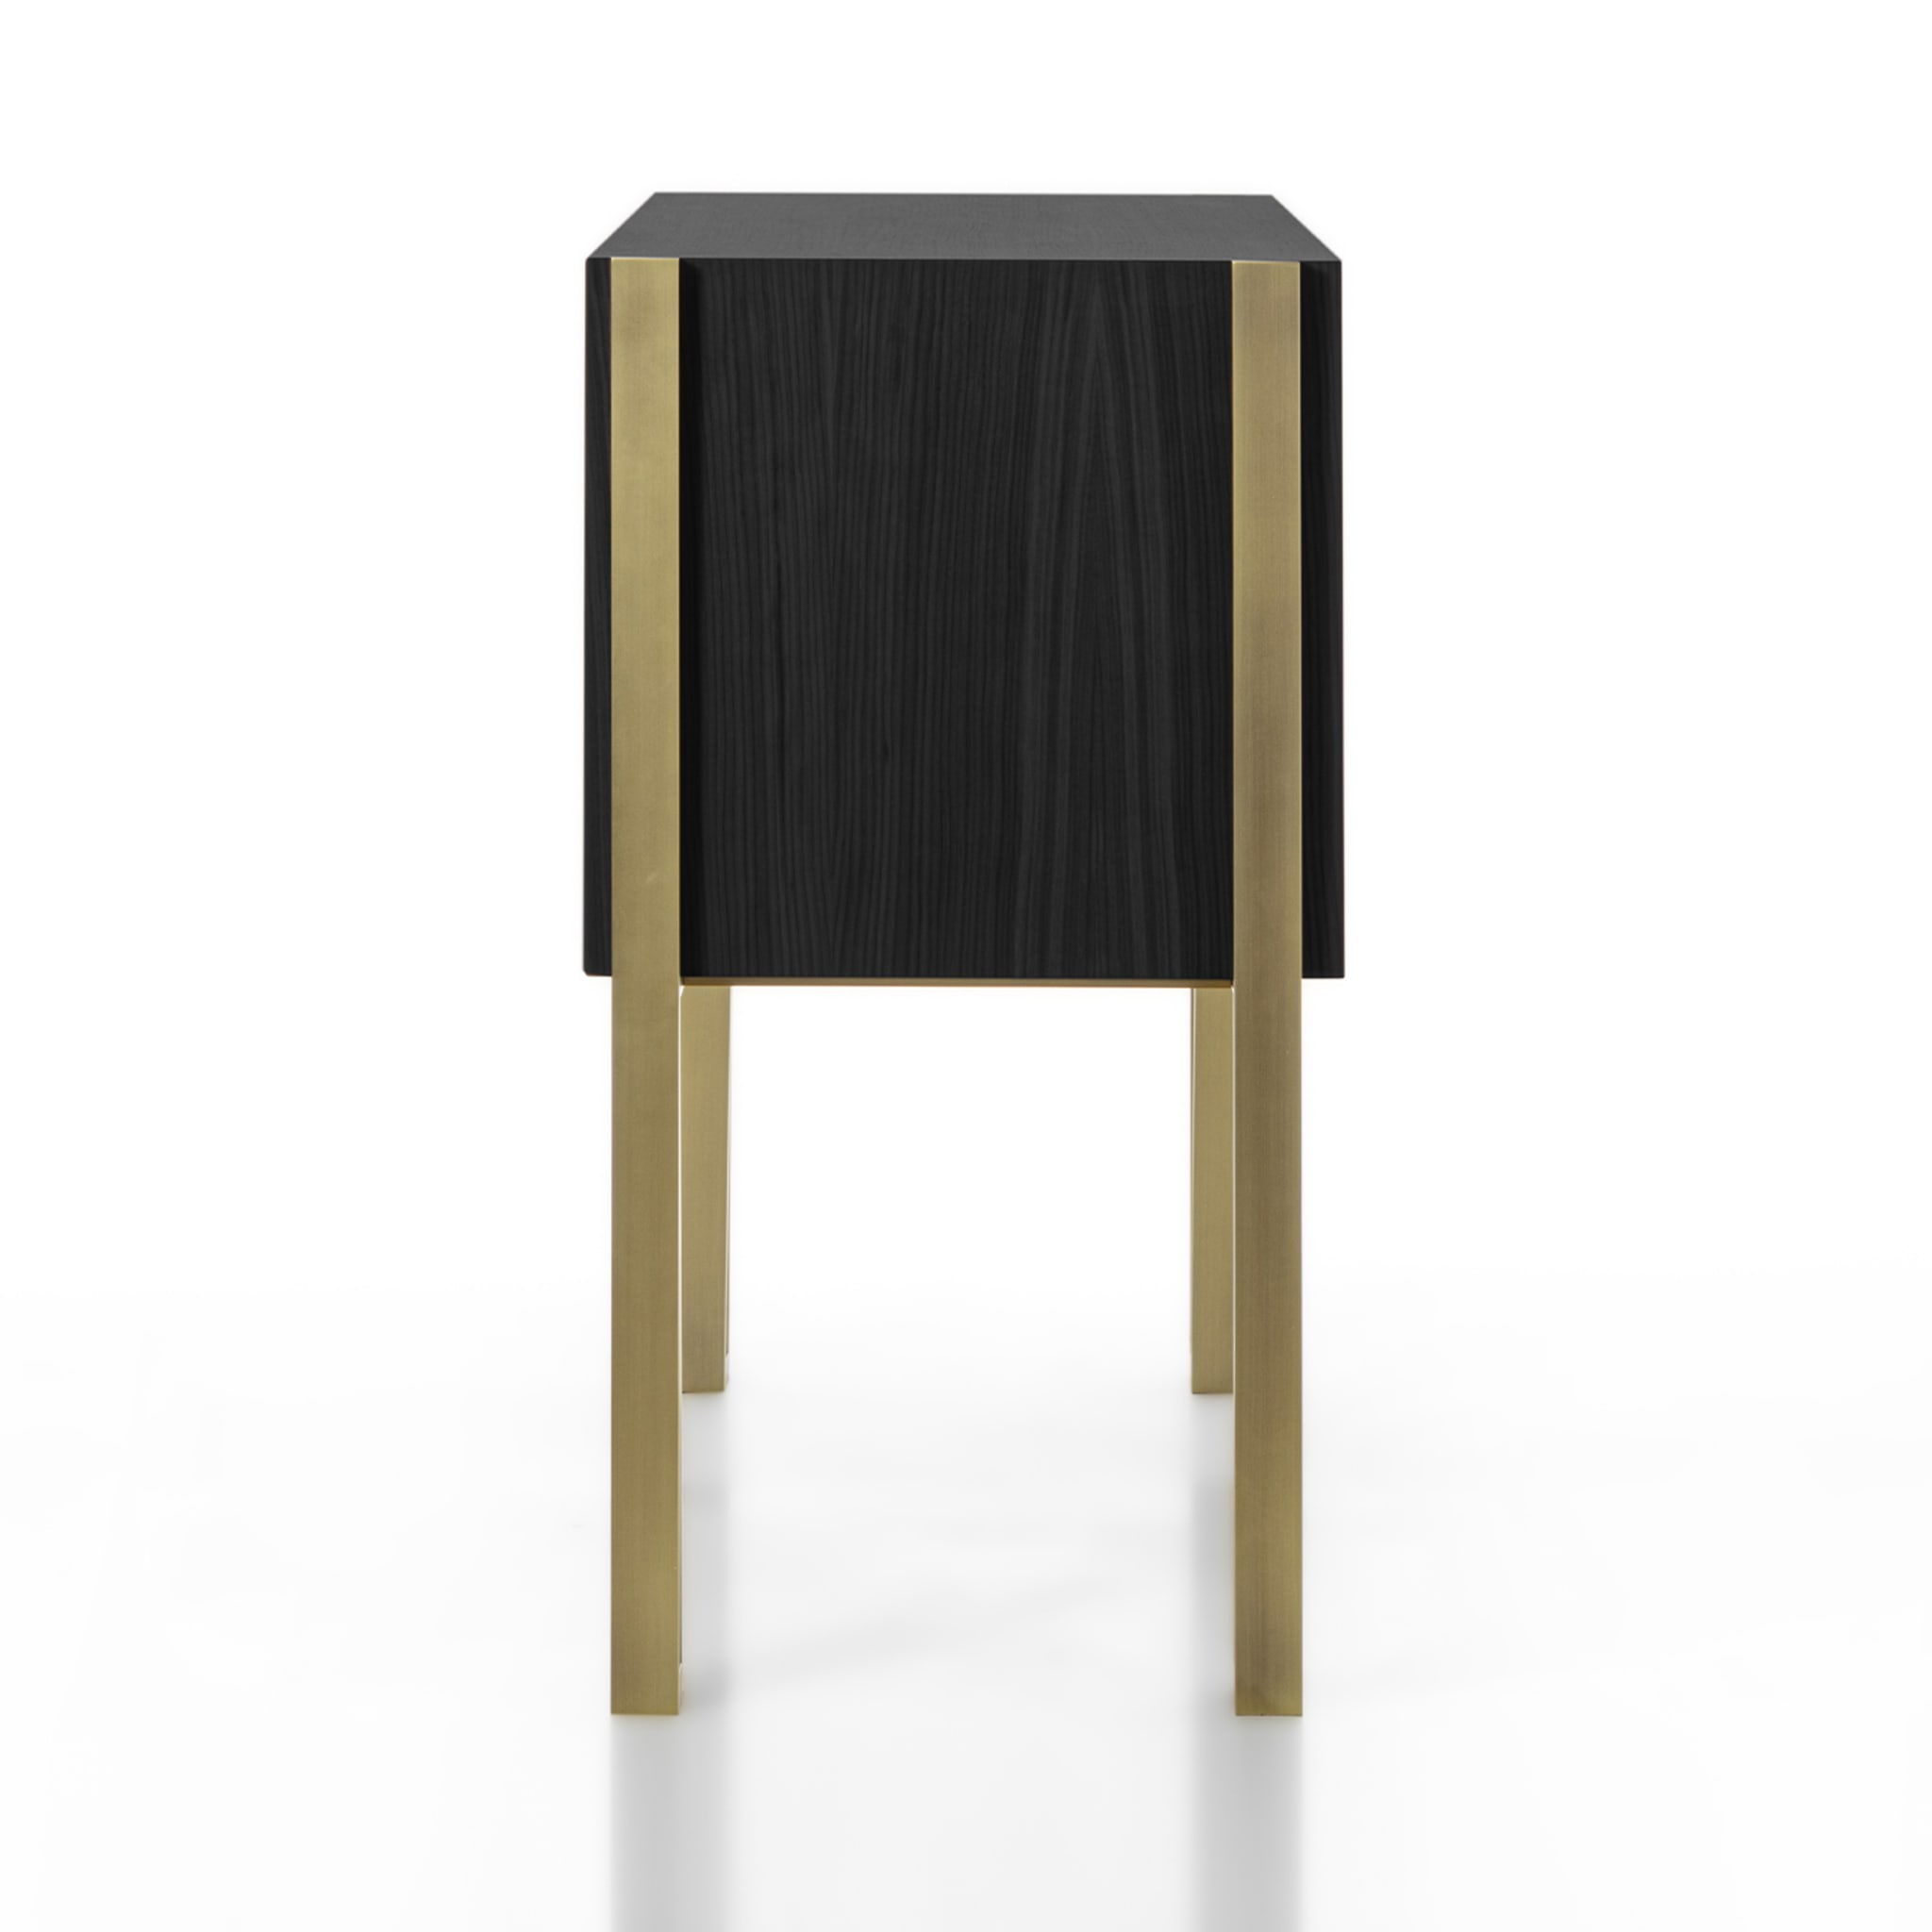 Mirage Vintage with Brass Legs in Opaque Black Sideboard - Alternative view 3